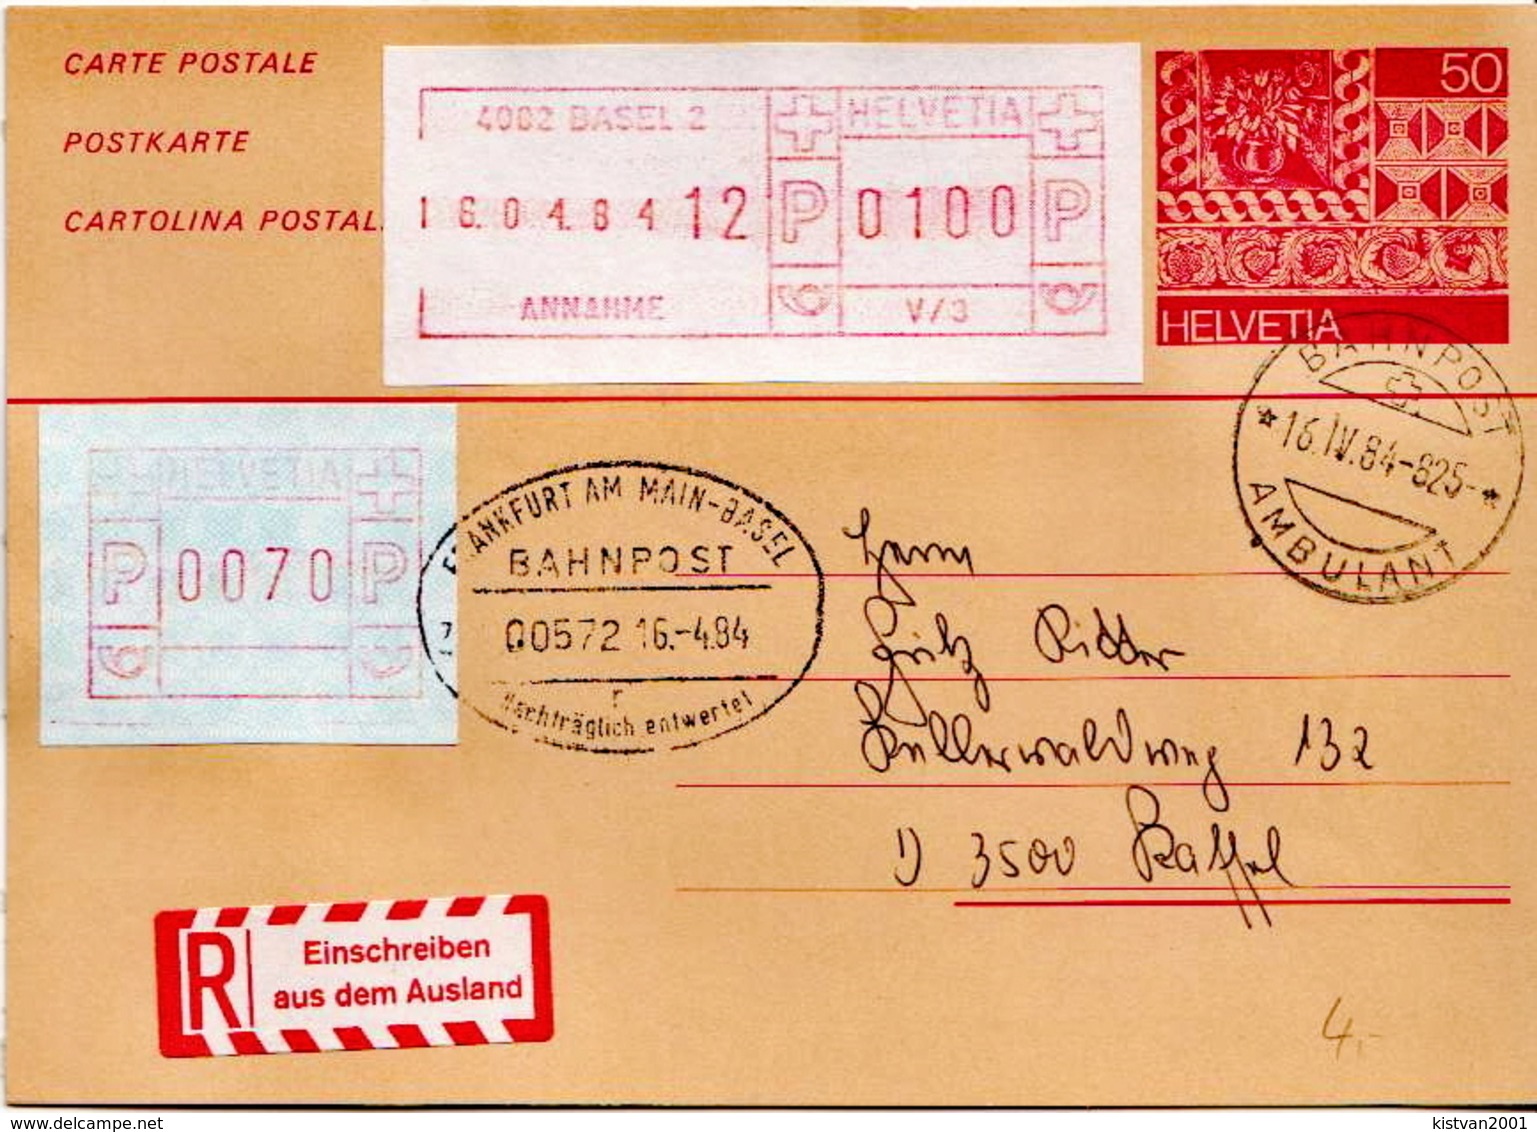 Postal History: Switzerland Registered Postal Stationery Postcard With Automat Stamps And Bahnpost Cancel - Automatic Stamps